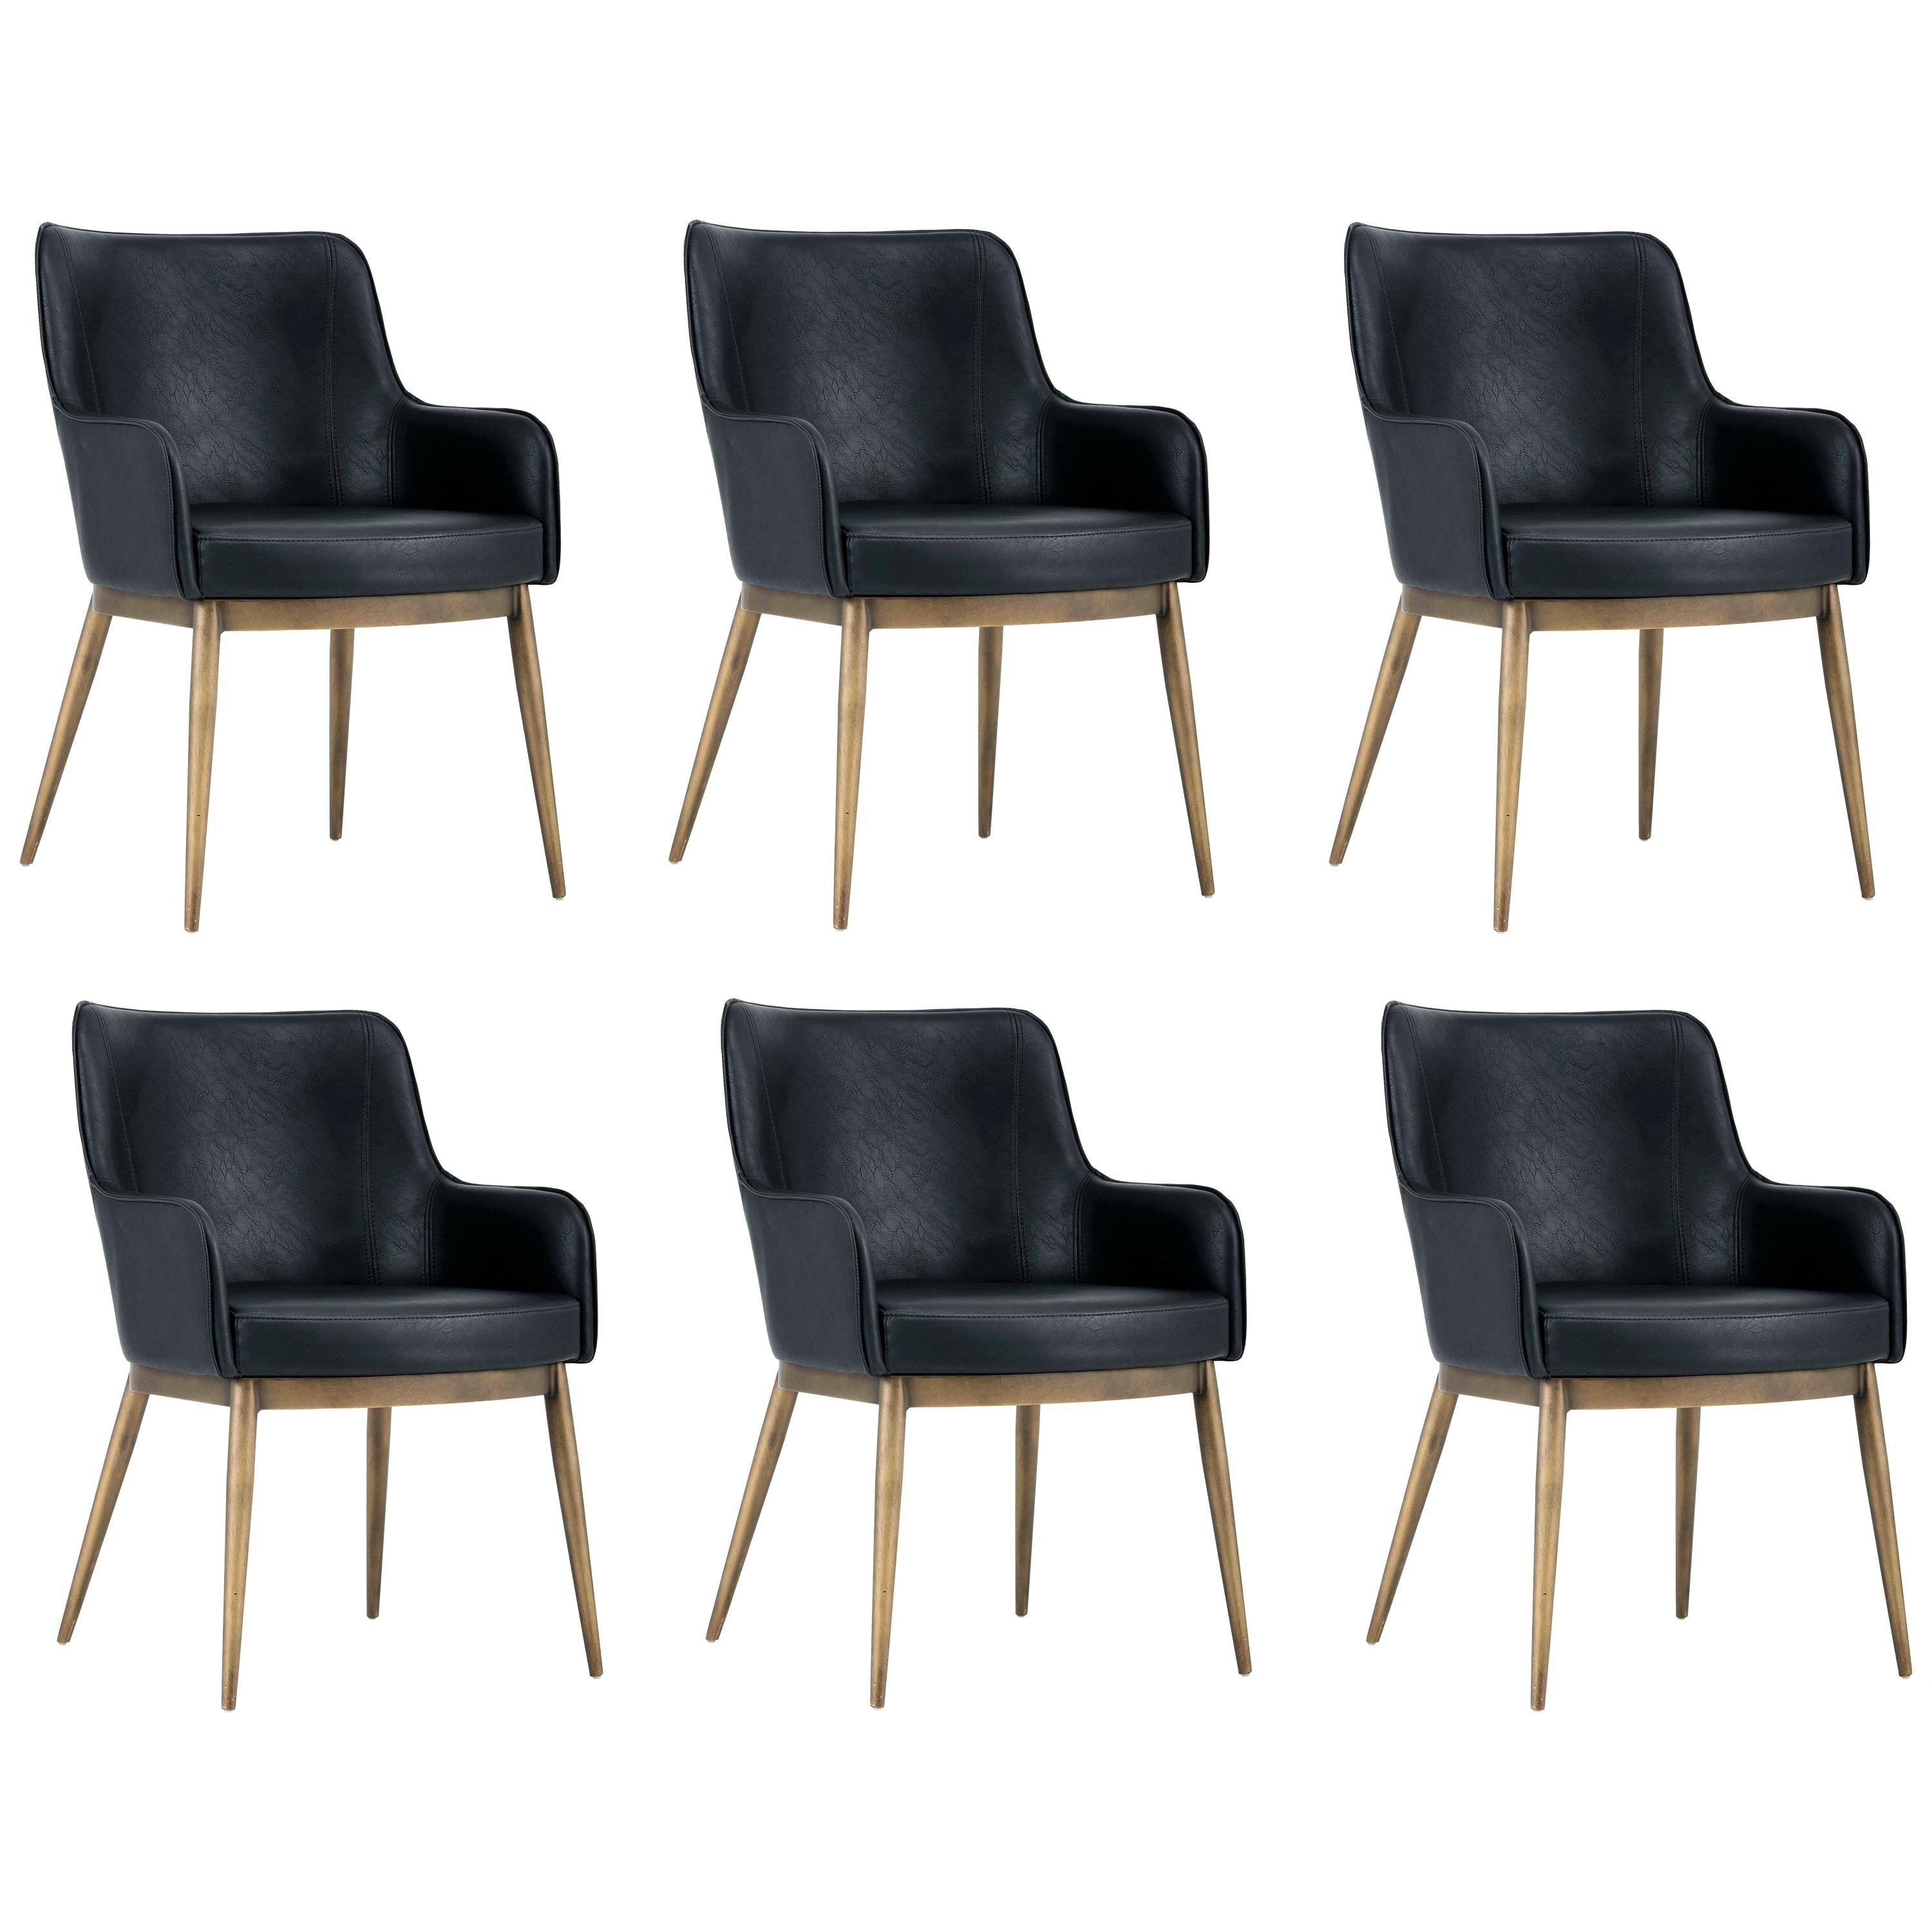 Set of 6, Mid-Century Modern Dining Chairs in Vintage Black Leather & Brass